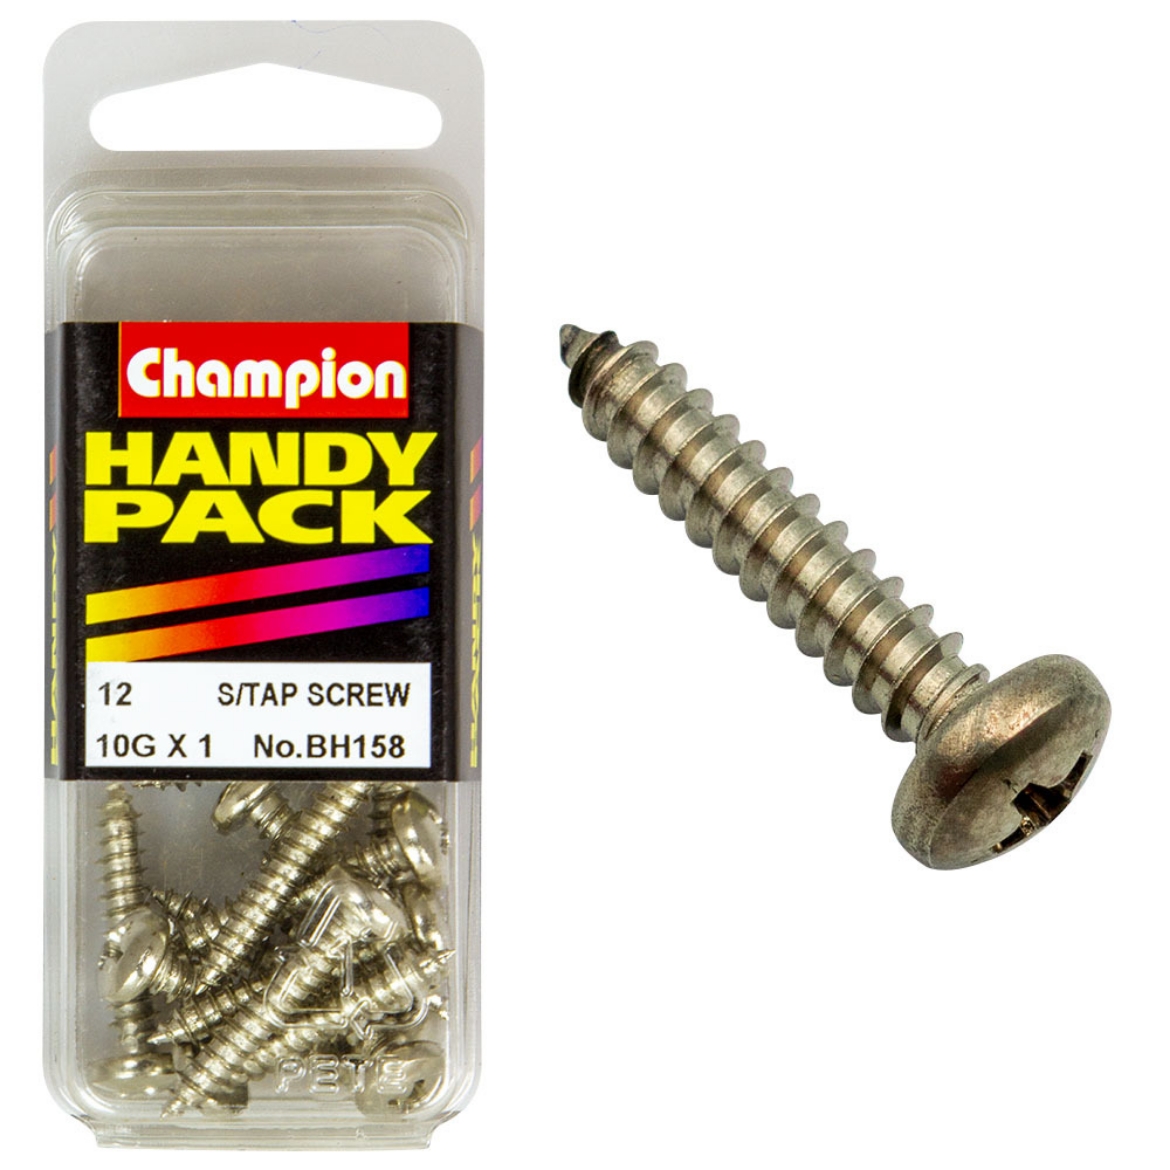 Picture of Handy Pk Self Tap Screw pan head 10g x 1 CST (Pkt.12)